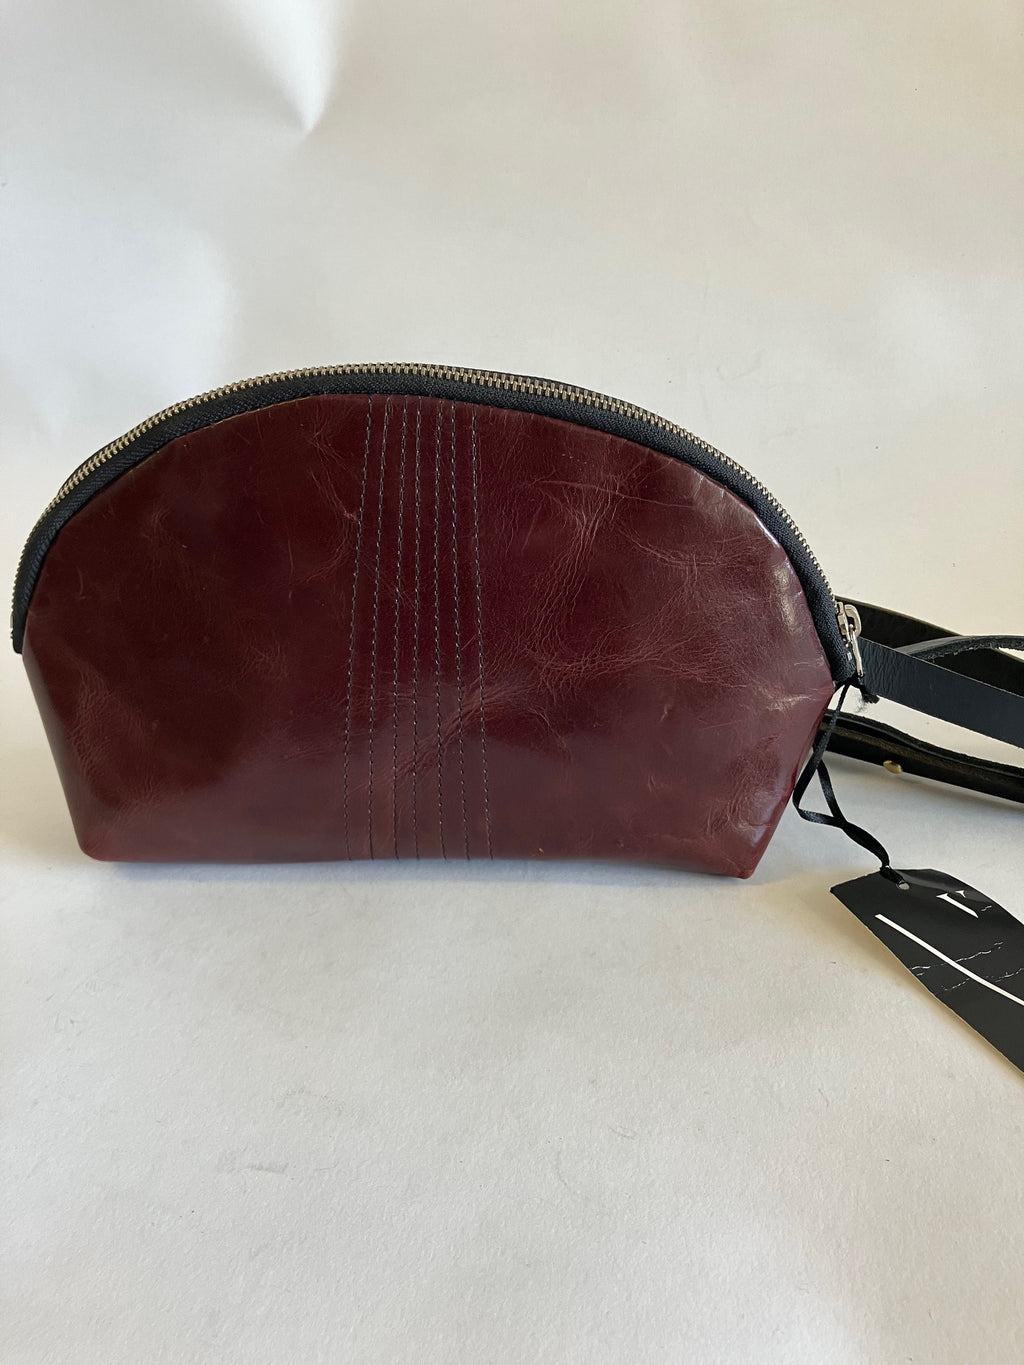 SAMPLE Minimalist small shoulder pouch in leather with quilted details